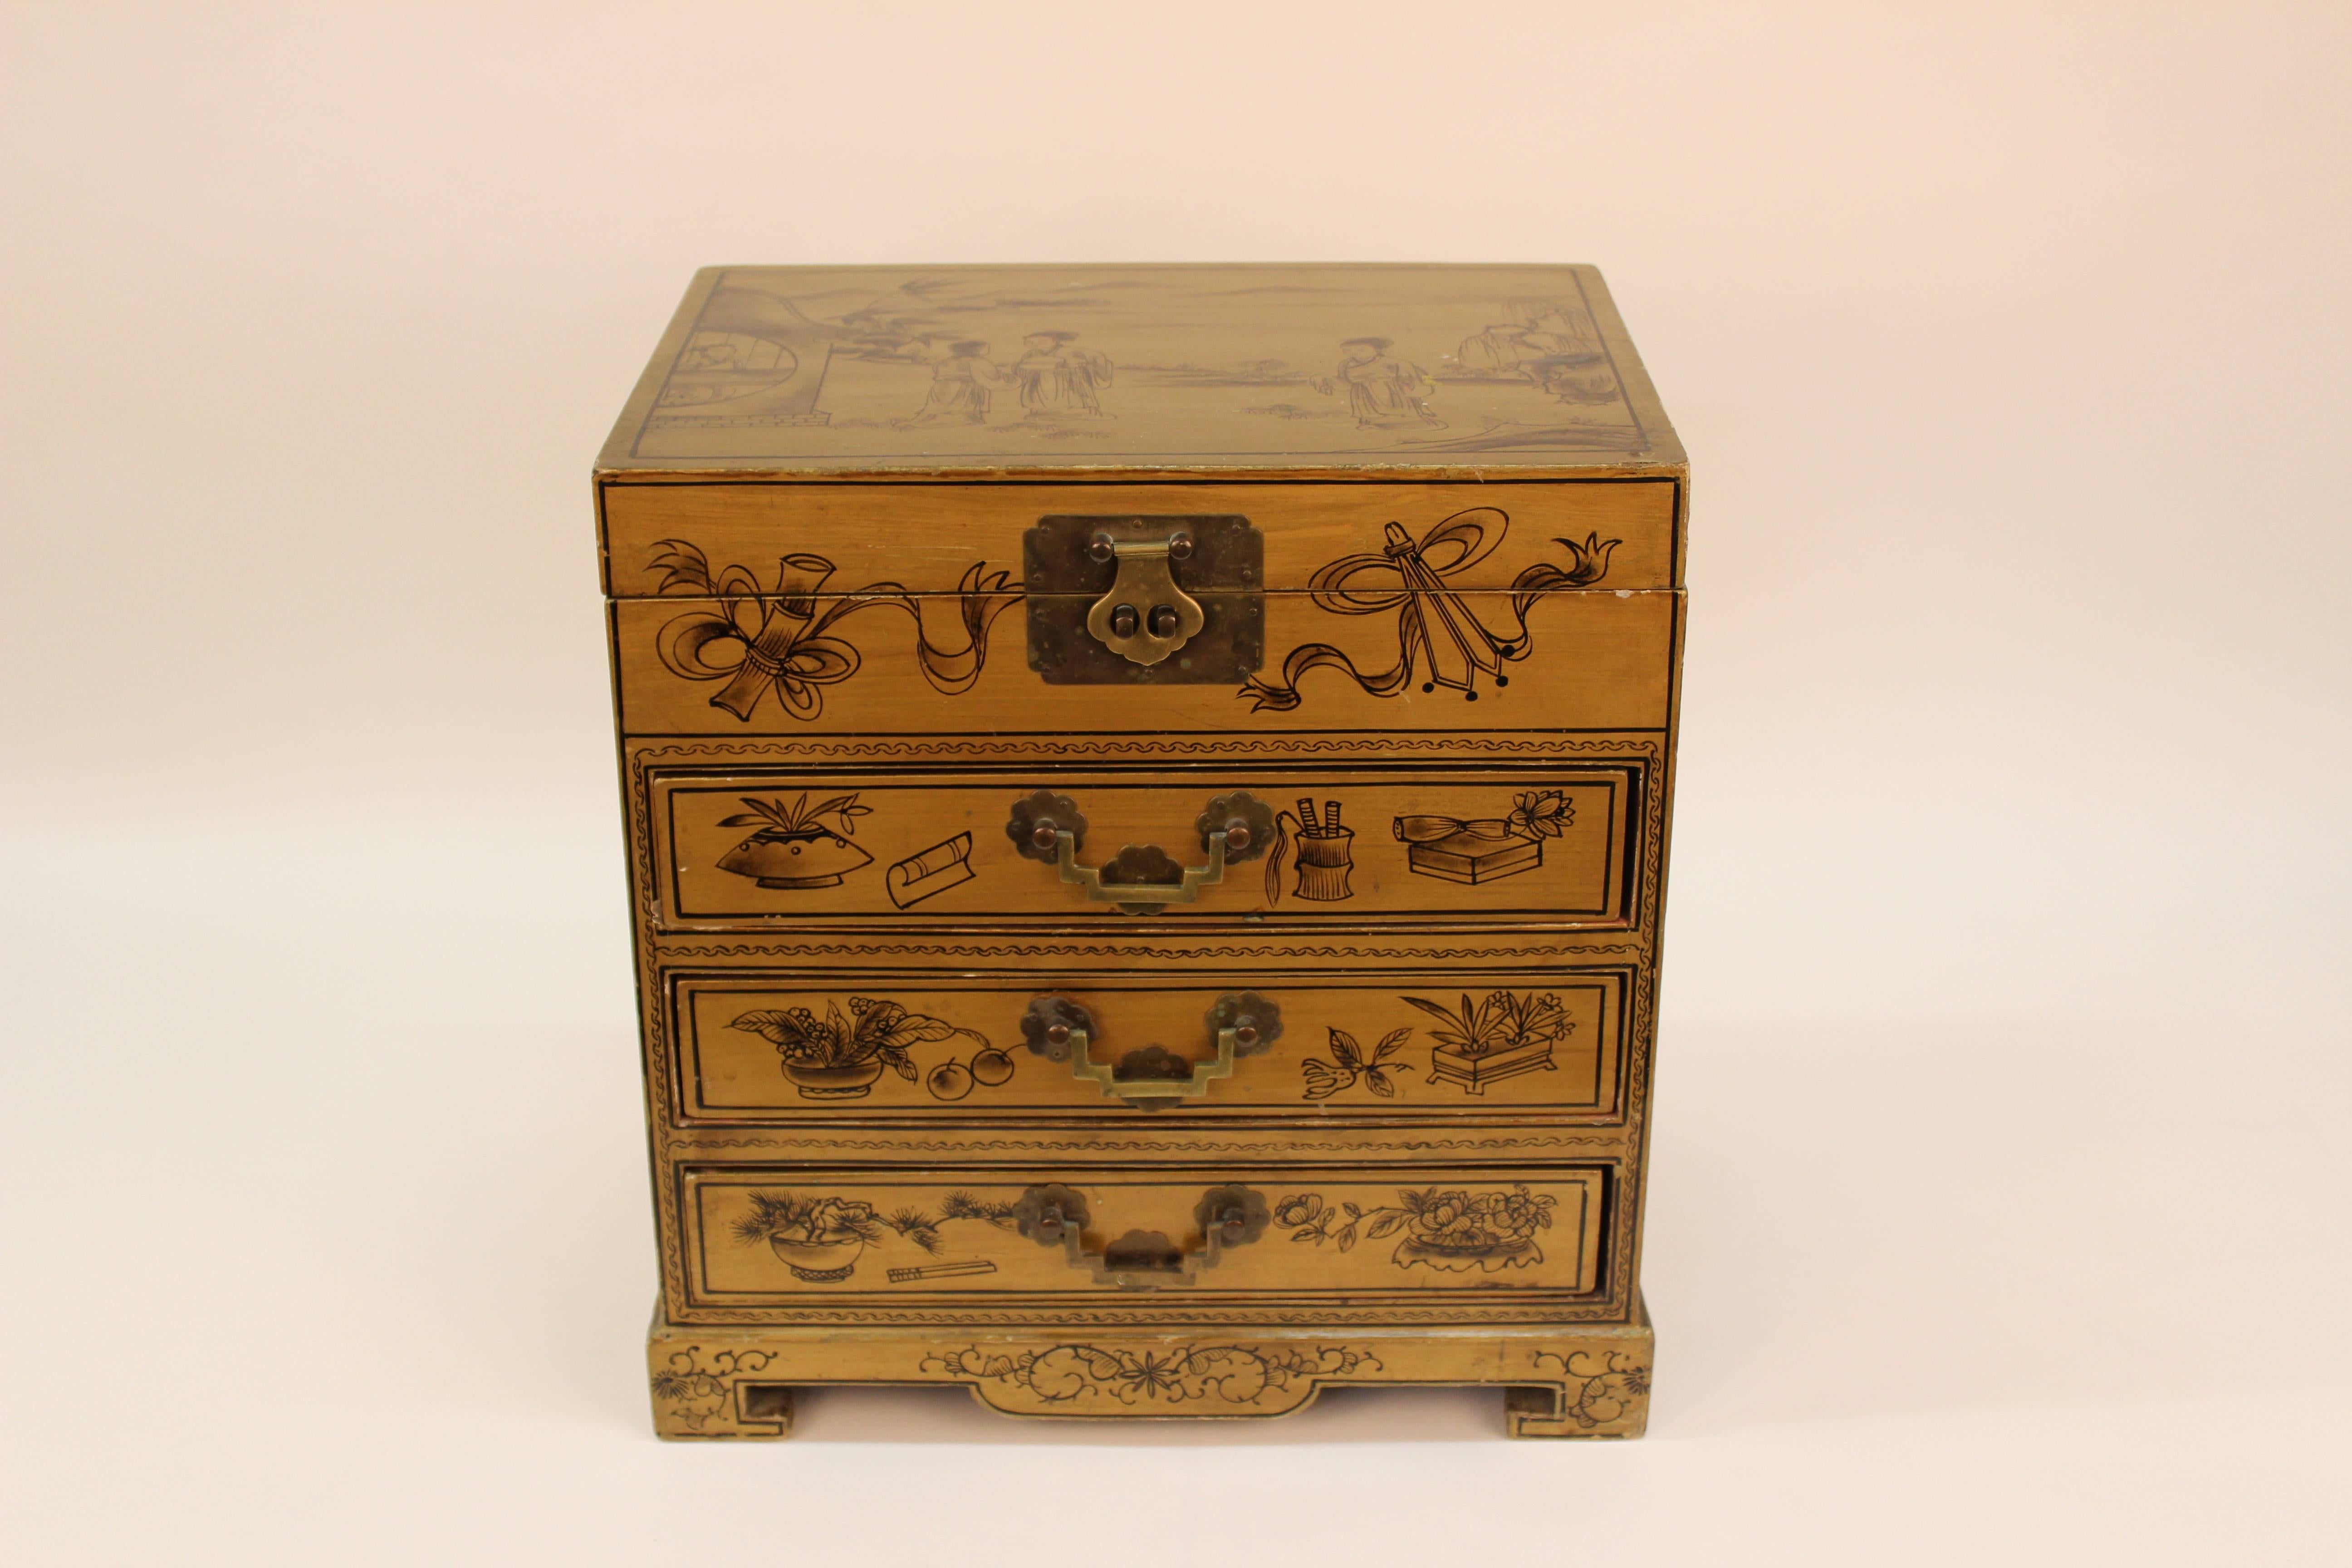 A wooden chinoiserie chest decorated with Chinese beauties in a lovely landscape, with auspicious symbols and peony blossoms. The box is lined with tangerine silk and includes three drawers that hold various configurations for rings and other